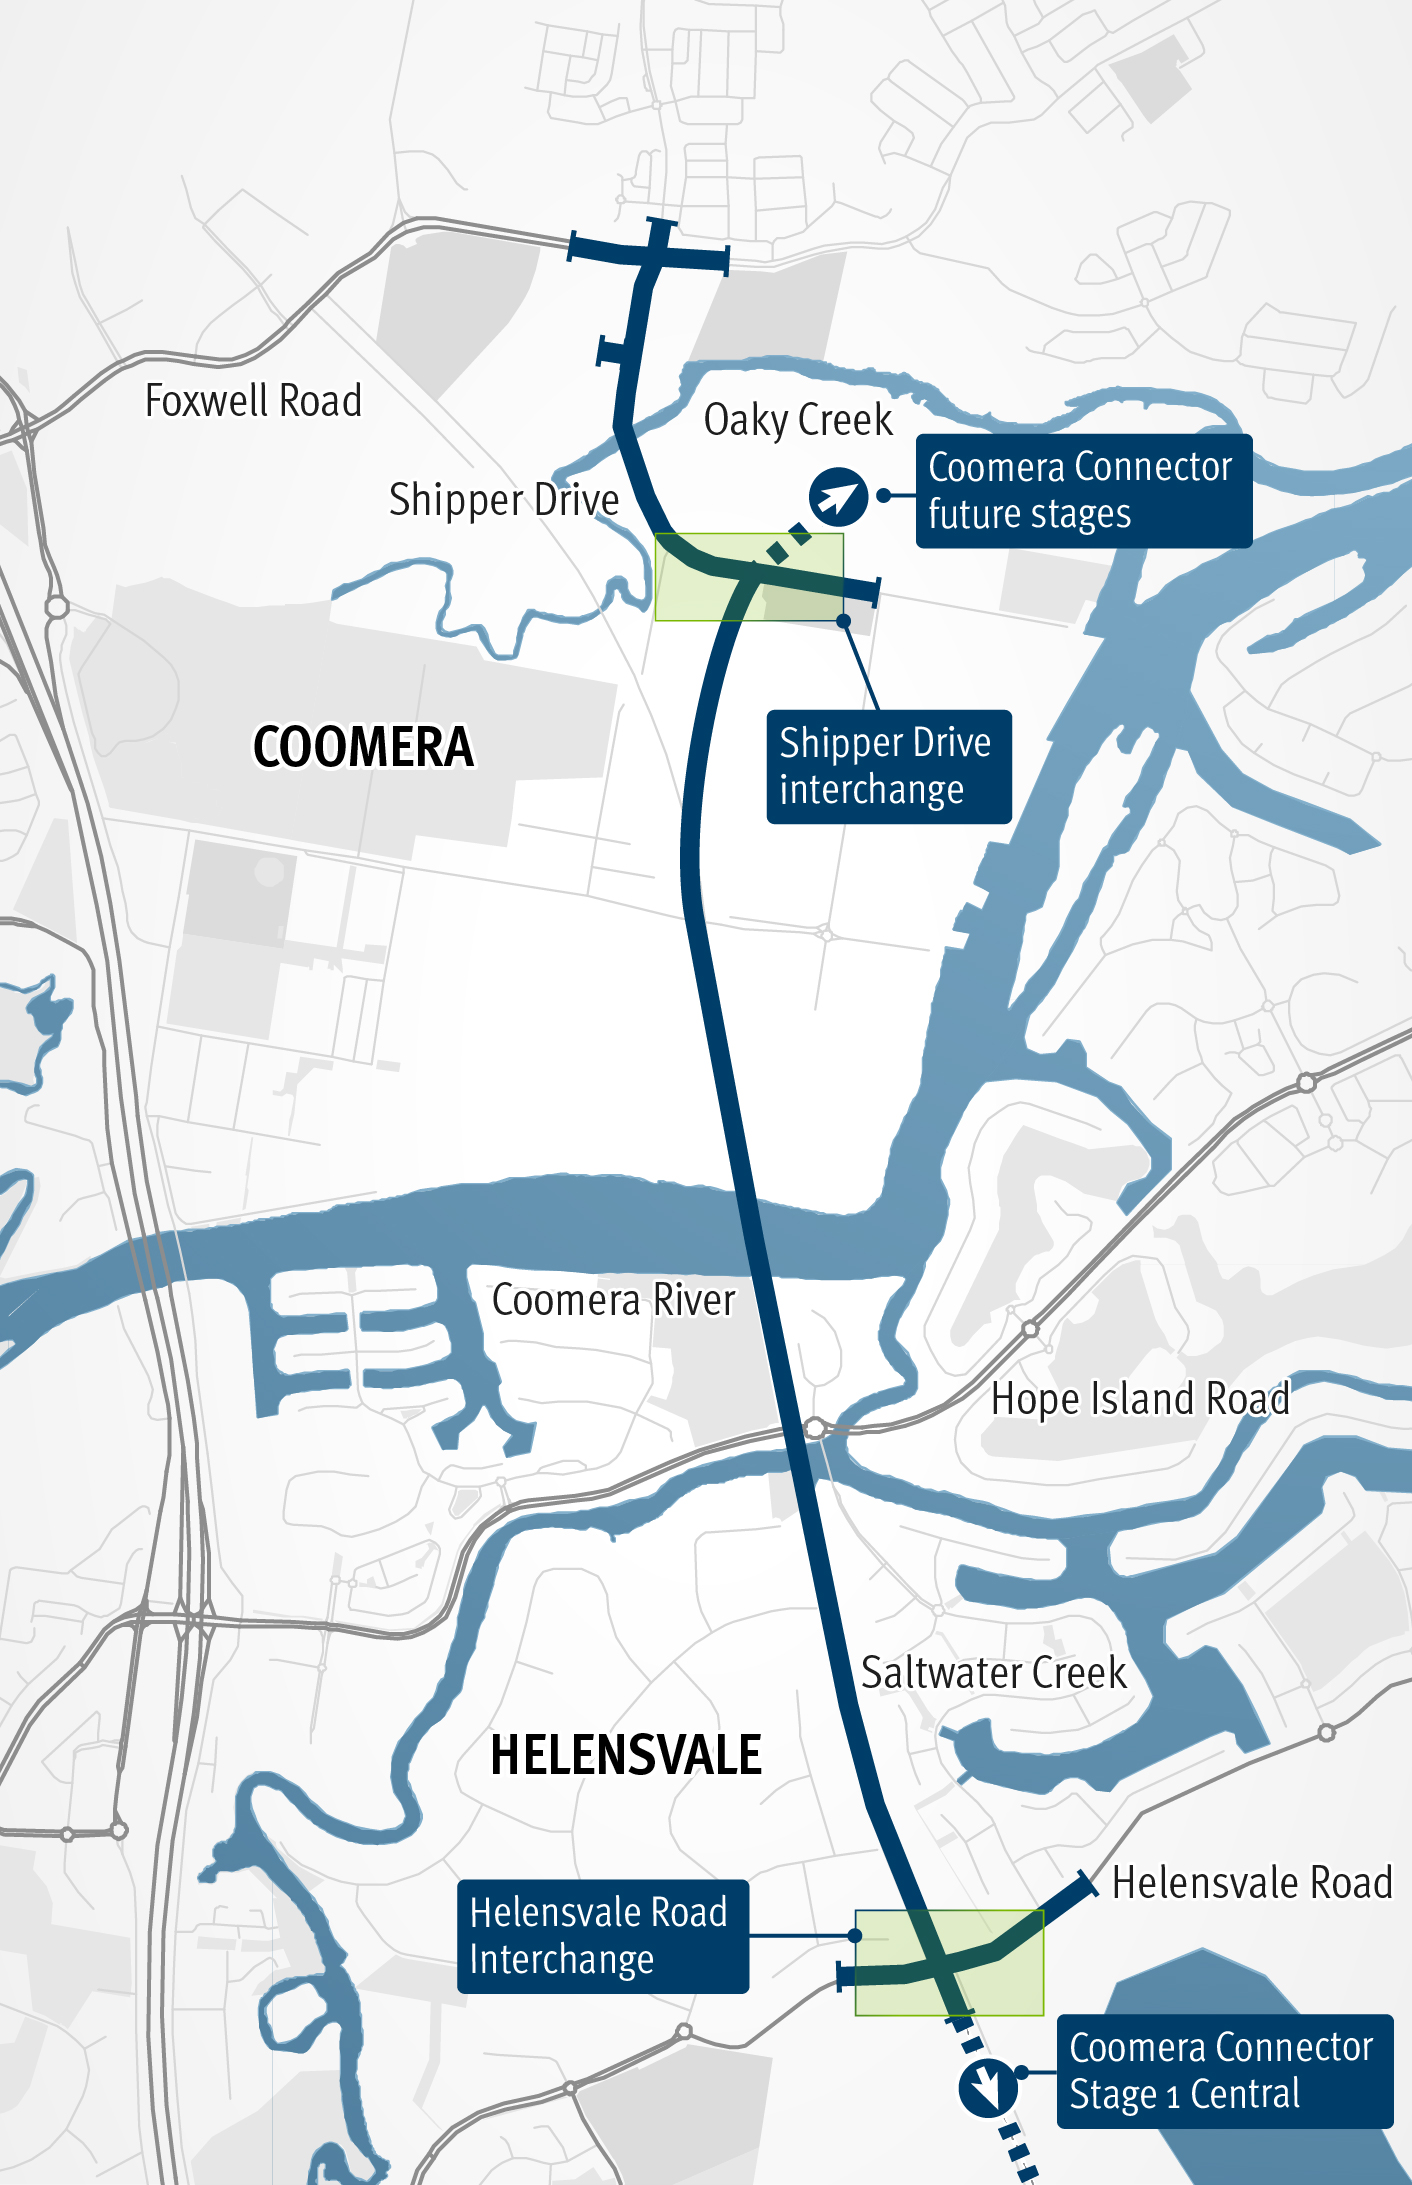 Project location map shows that the Coomera Connector stage 1 will start at Helensvale road and end at Shipper drive. 